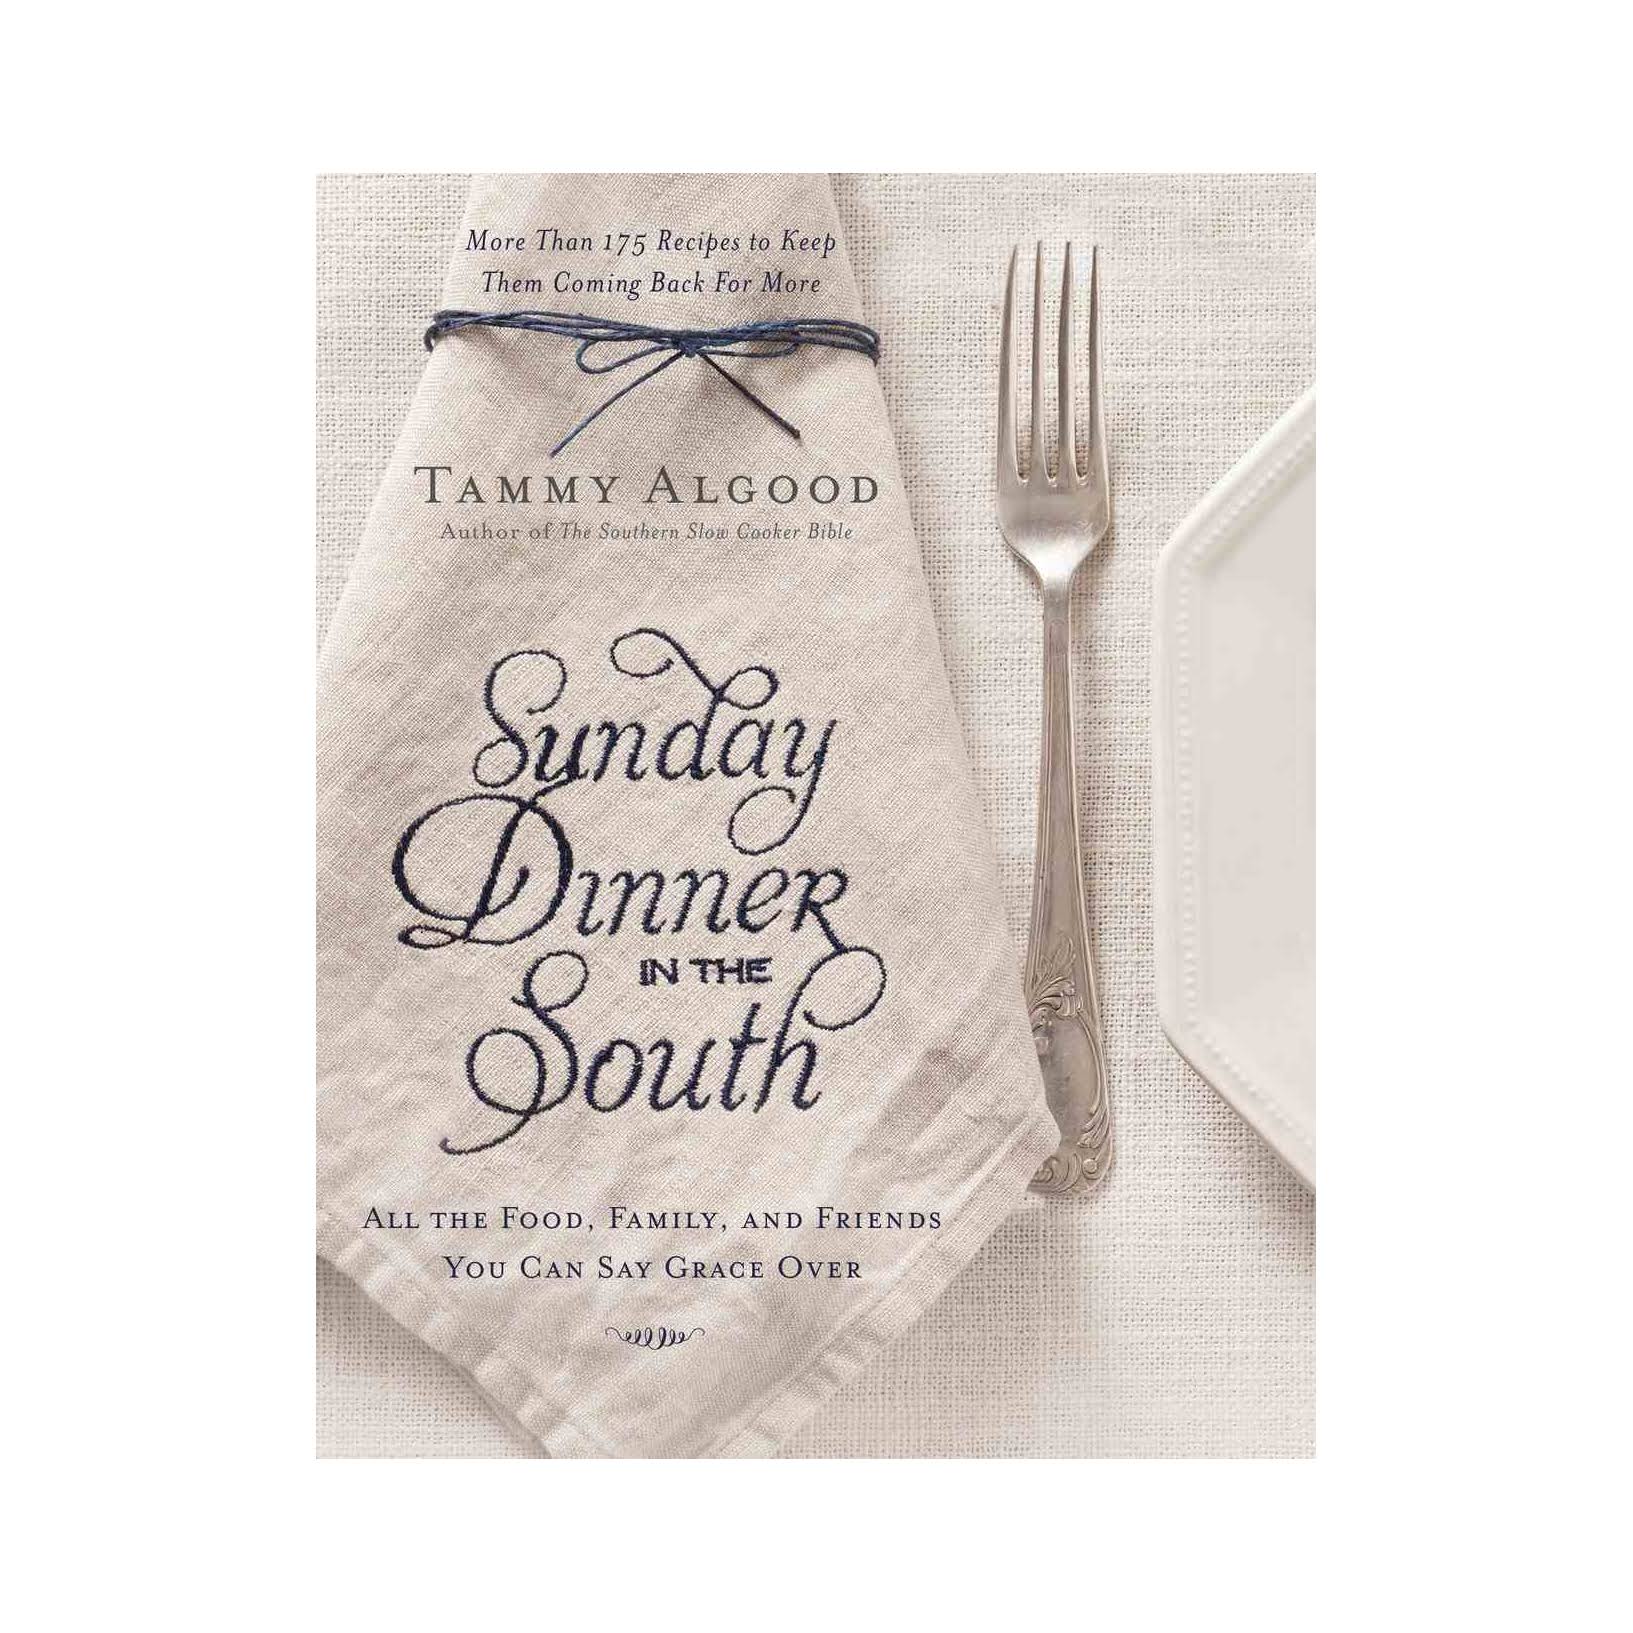 Sunday Dinner in the South - Tammy Algood